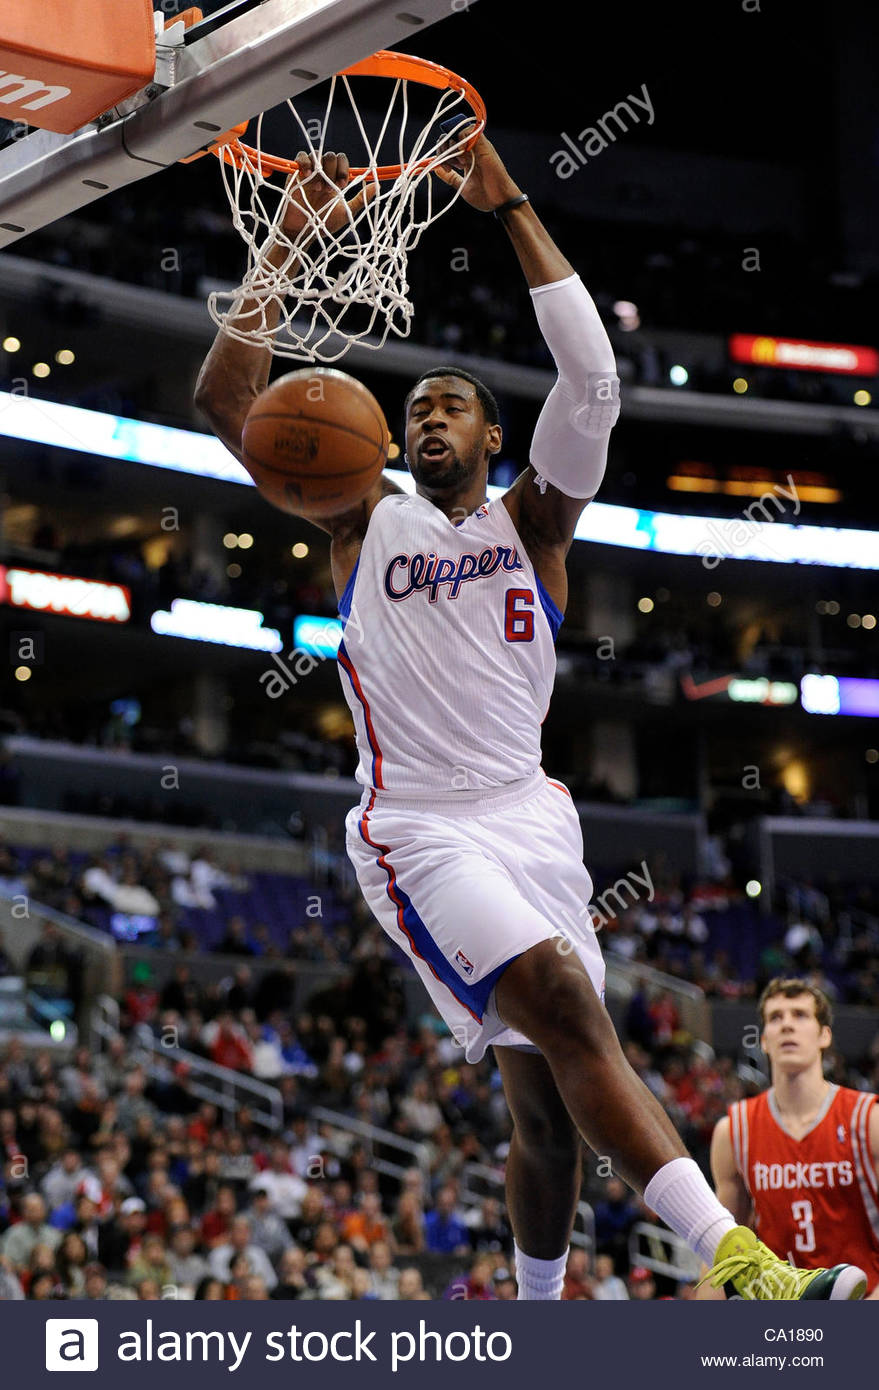 The Clippers' DeAndre Jordan (6) dunks the ball as the Rockets' Stock Photo  - Alamy